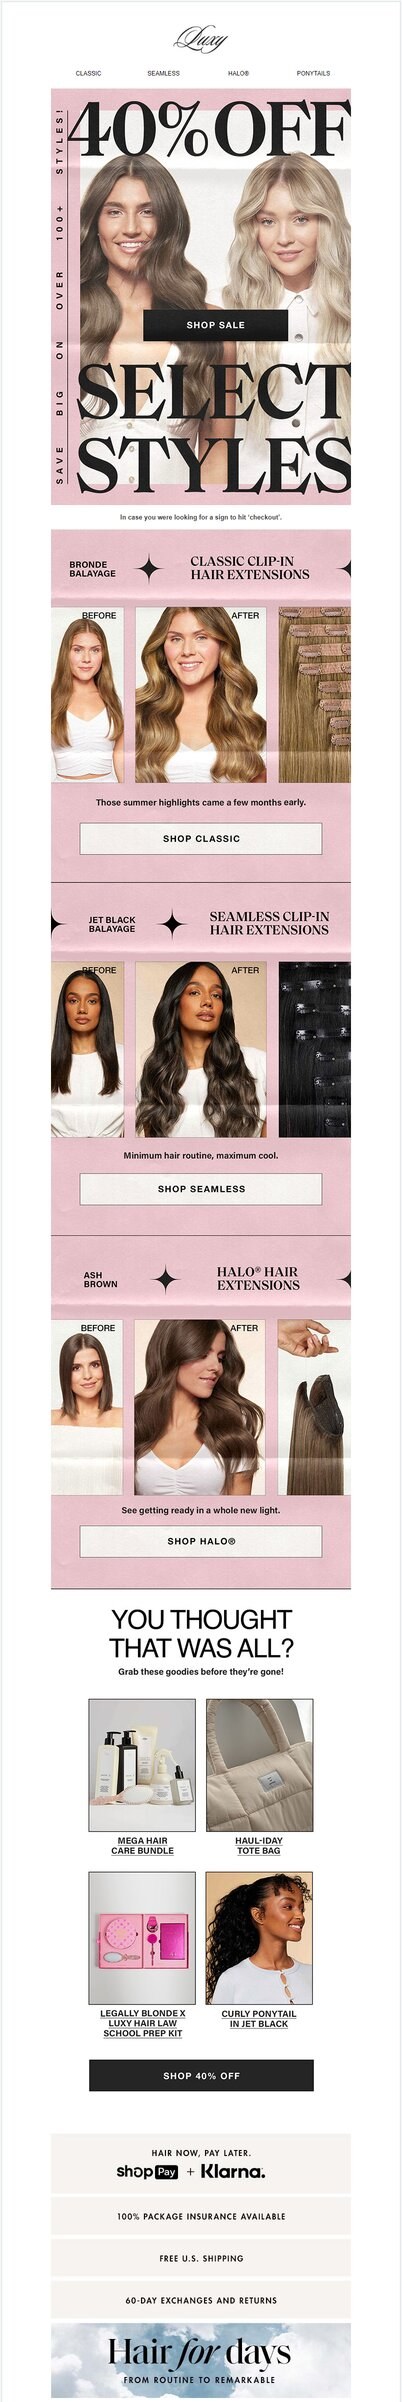 Hair care email example: Luxy hair